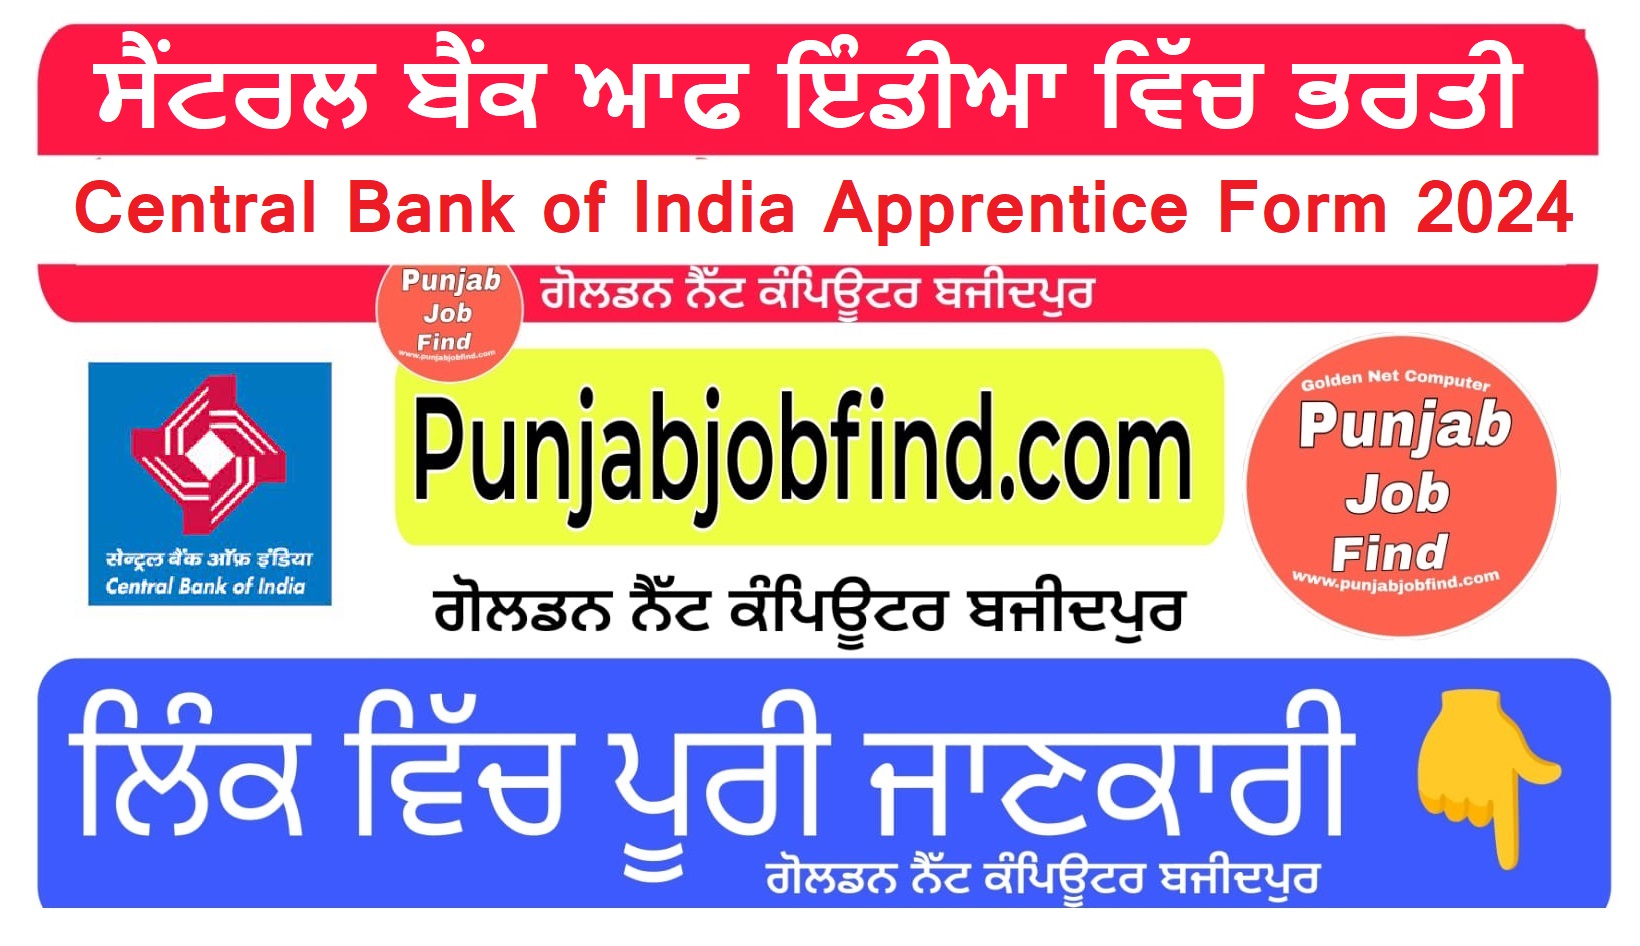 Central Bank of India Apprentice Form 2024